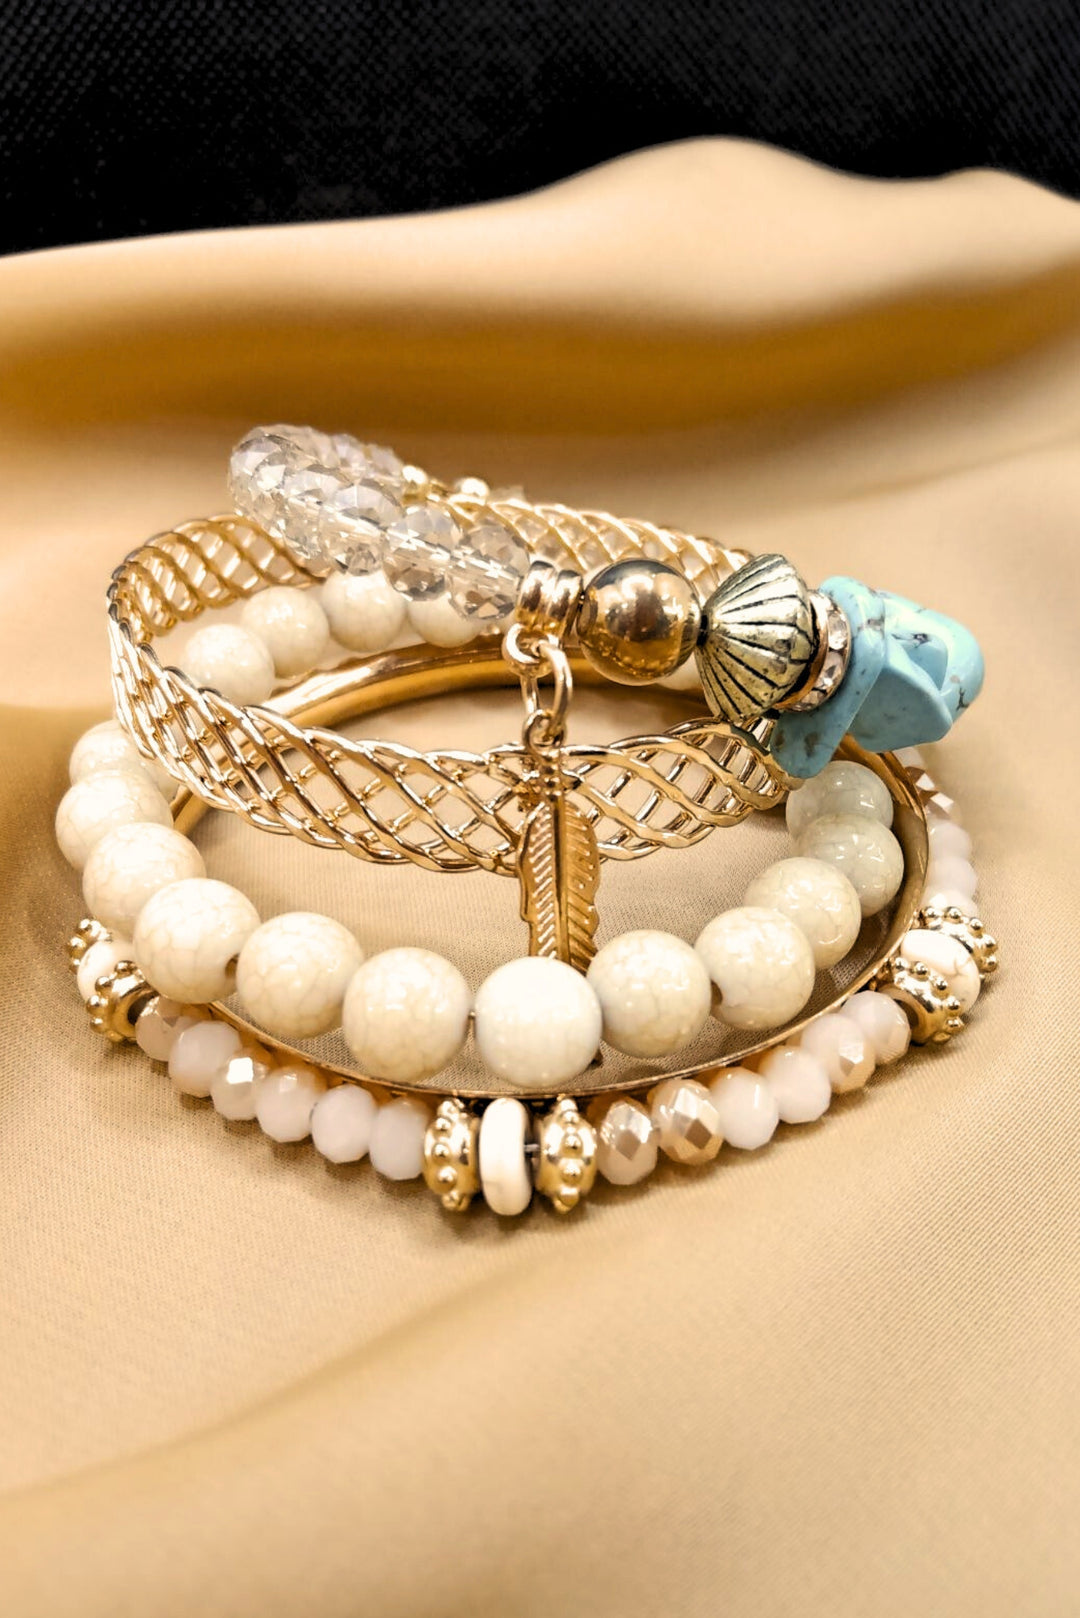 Hand Accessories for Women: Bracelets, Rings & More